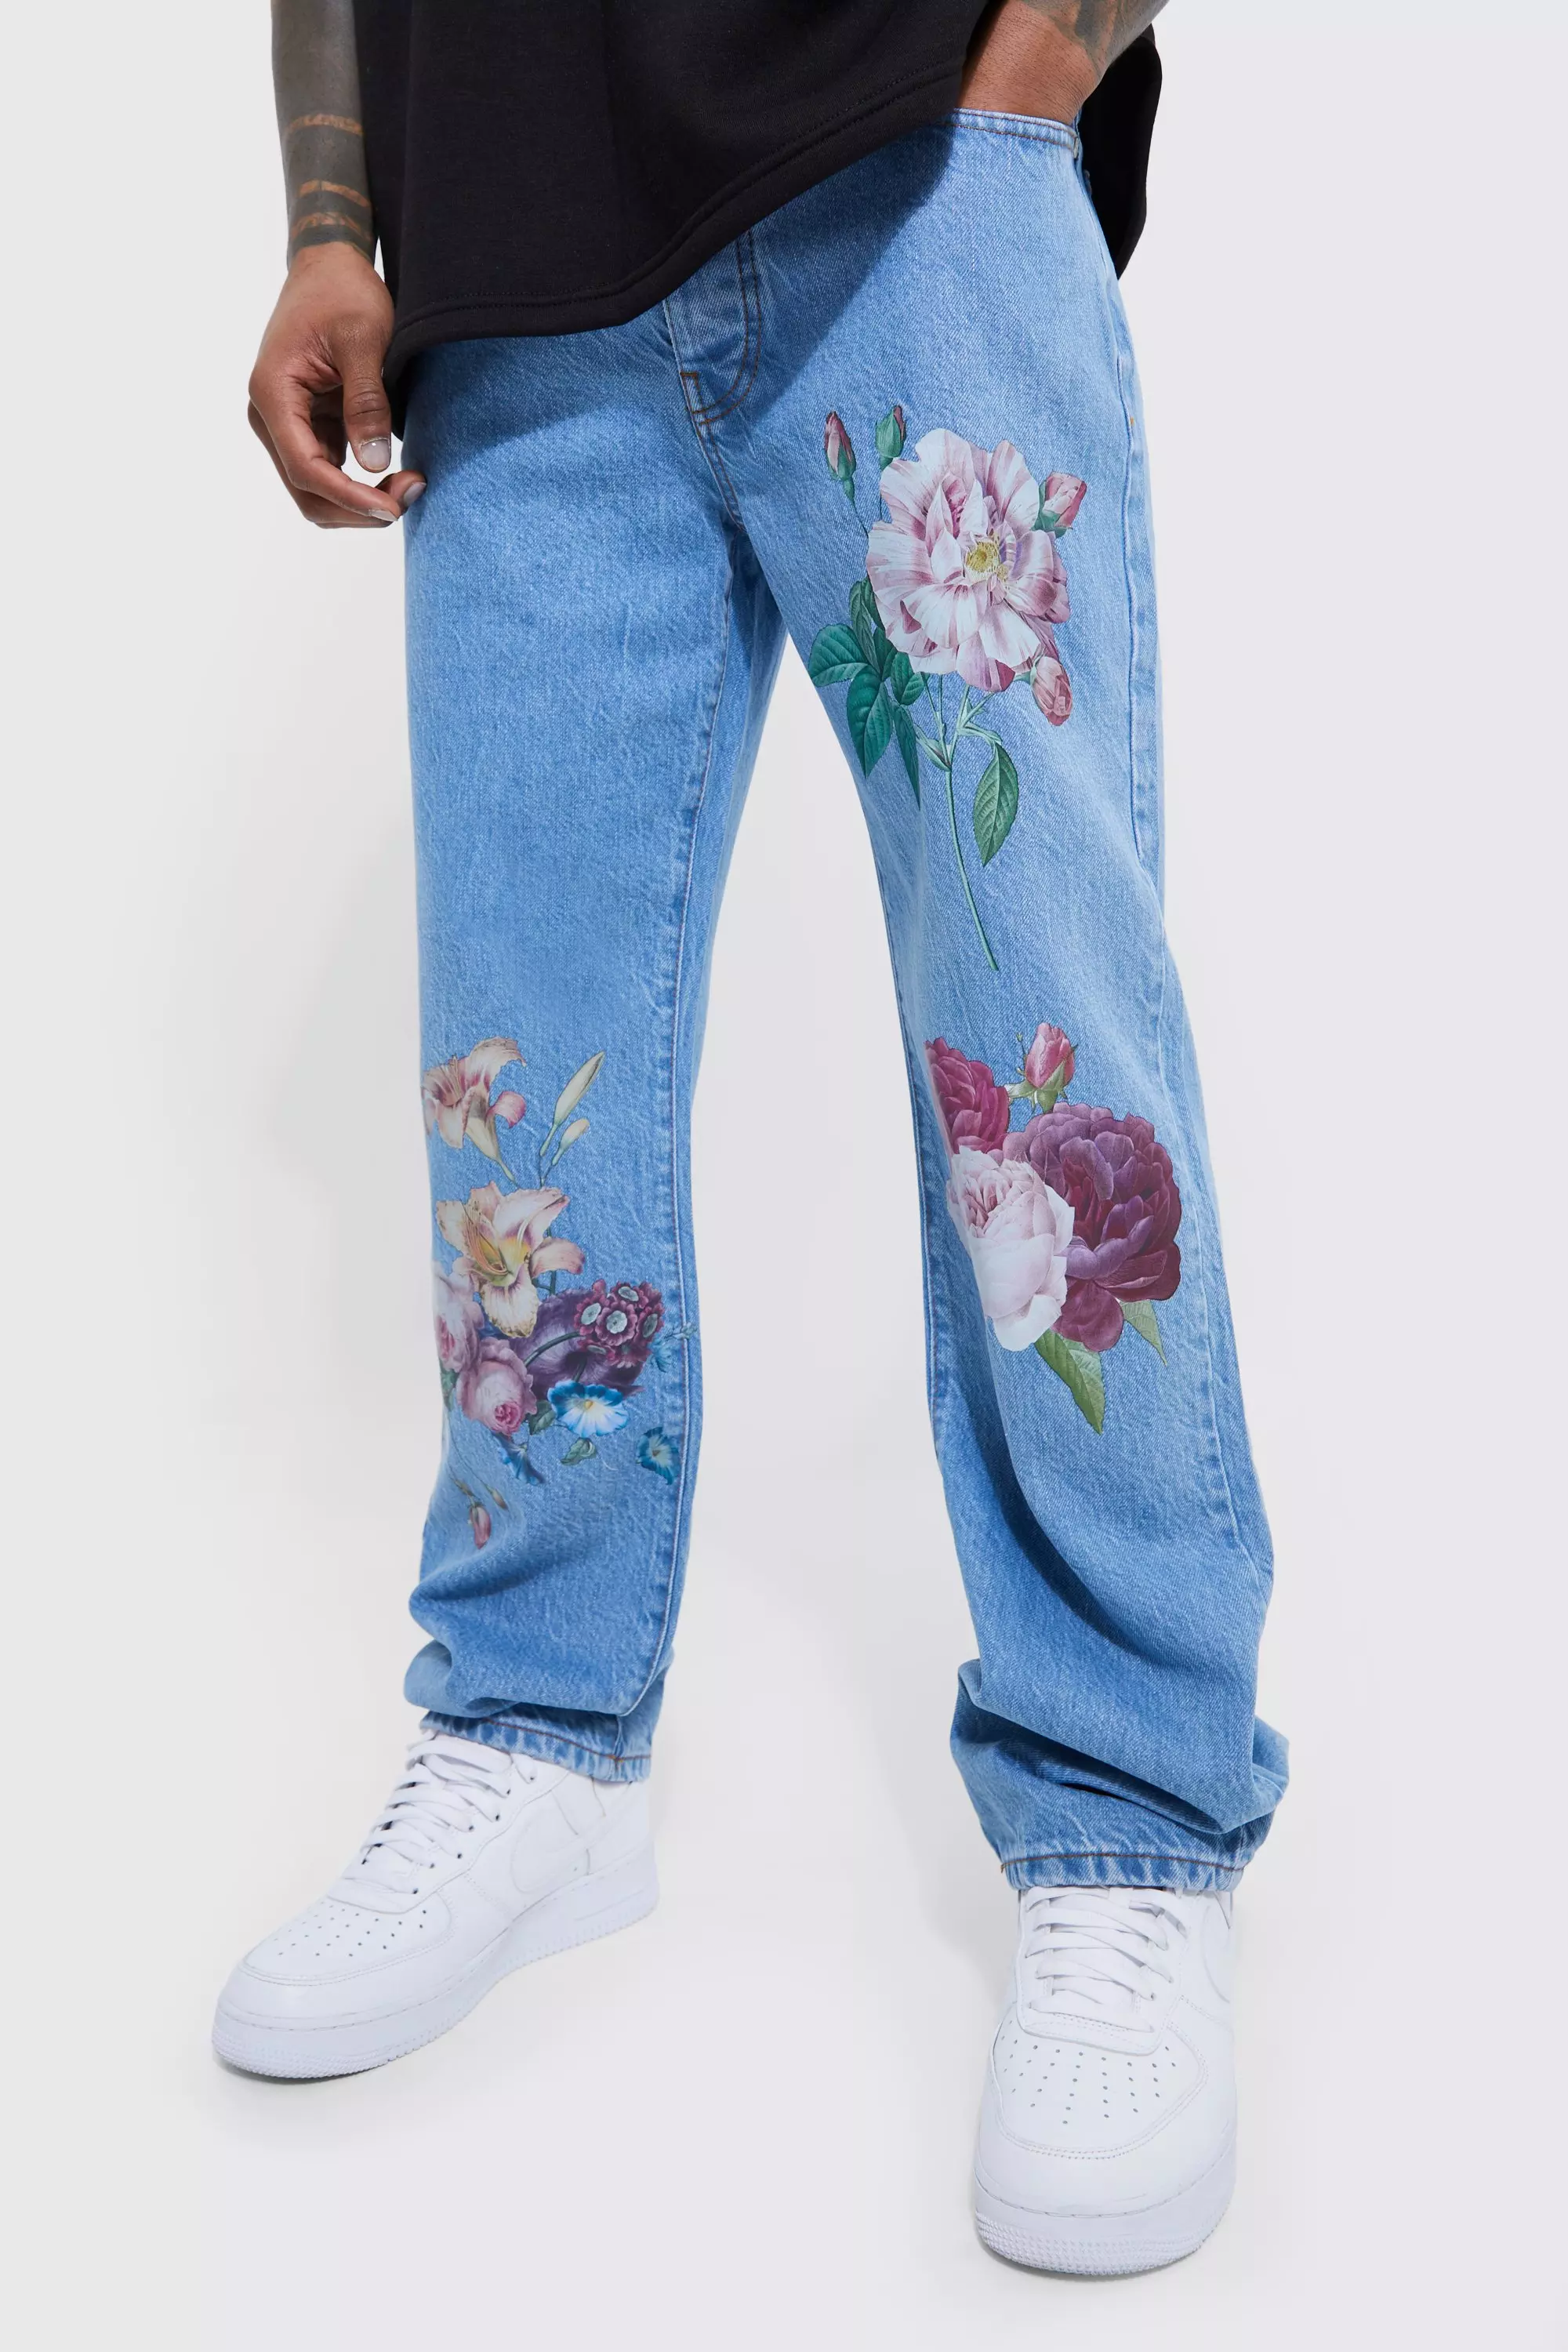 Designer Flower Full Print Oversized Flower Jeans Pants Straight Streetwear  Fashion Brand For Men And Women From Fashionfusion, $28.94